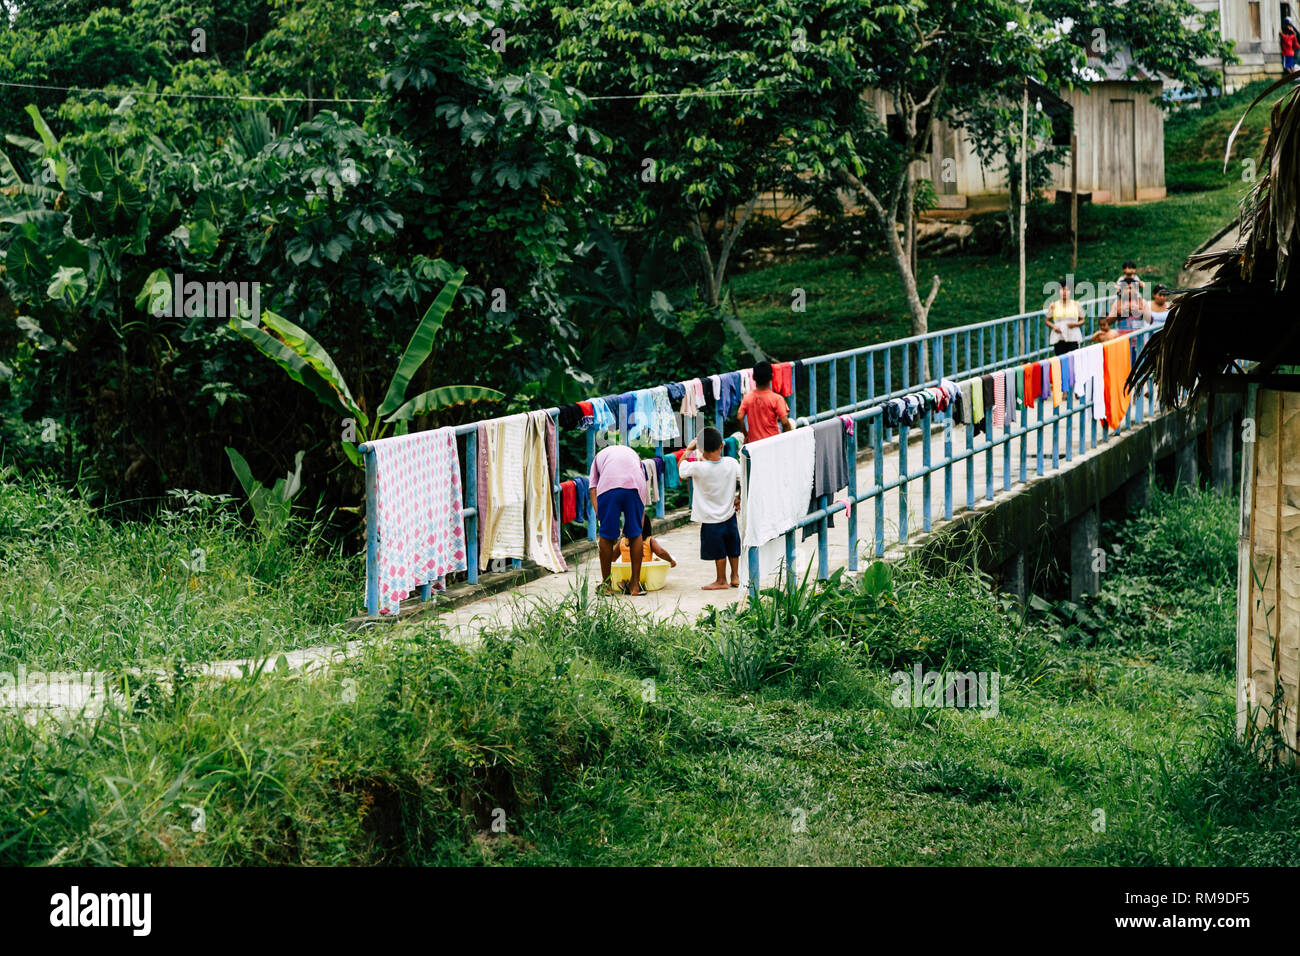 Surrounded by lush vegetation, young children are hanging laundry to the rails of a bridge in a village (Padre Cocha) in the Amazon jungle in Peru. Stock Photo